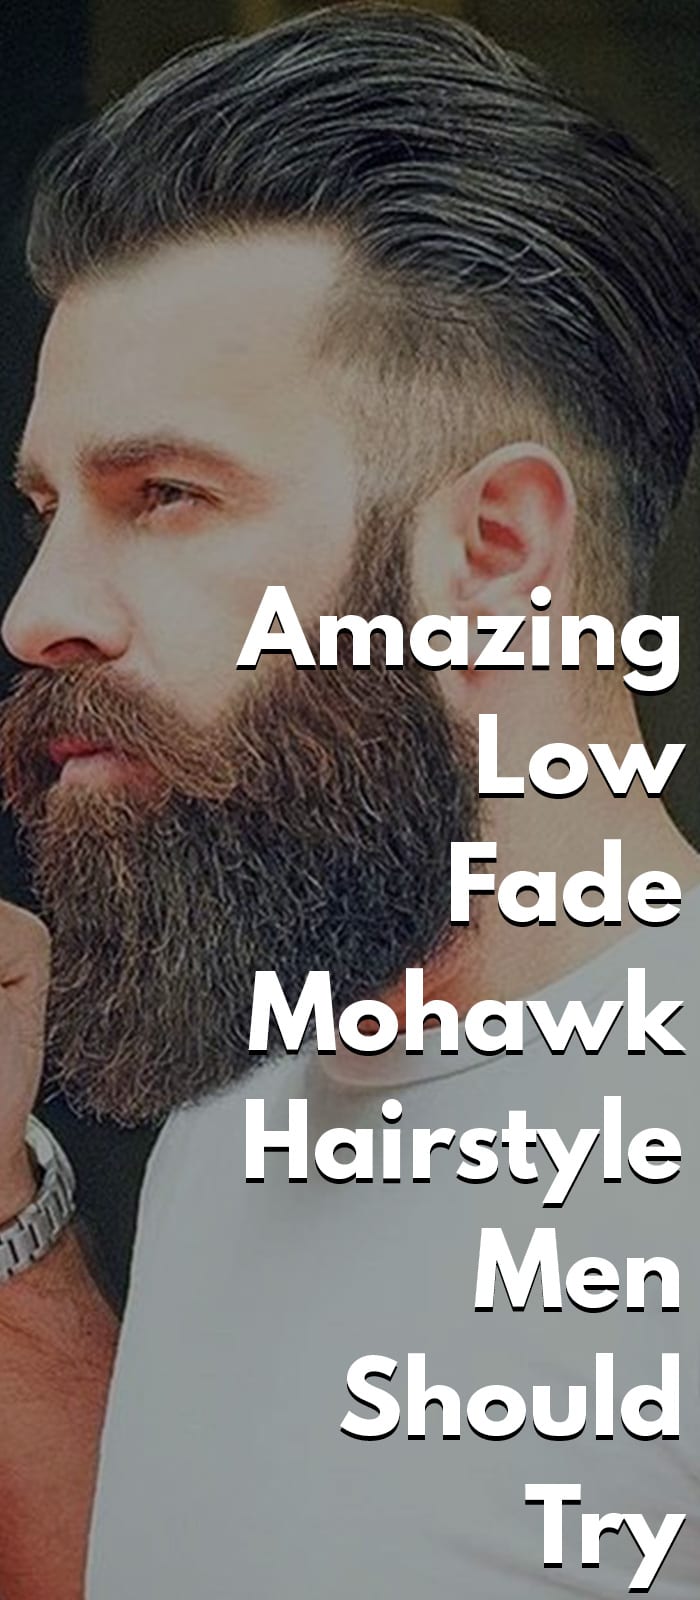 Amazing Low Fade Mohawk Hairstyle